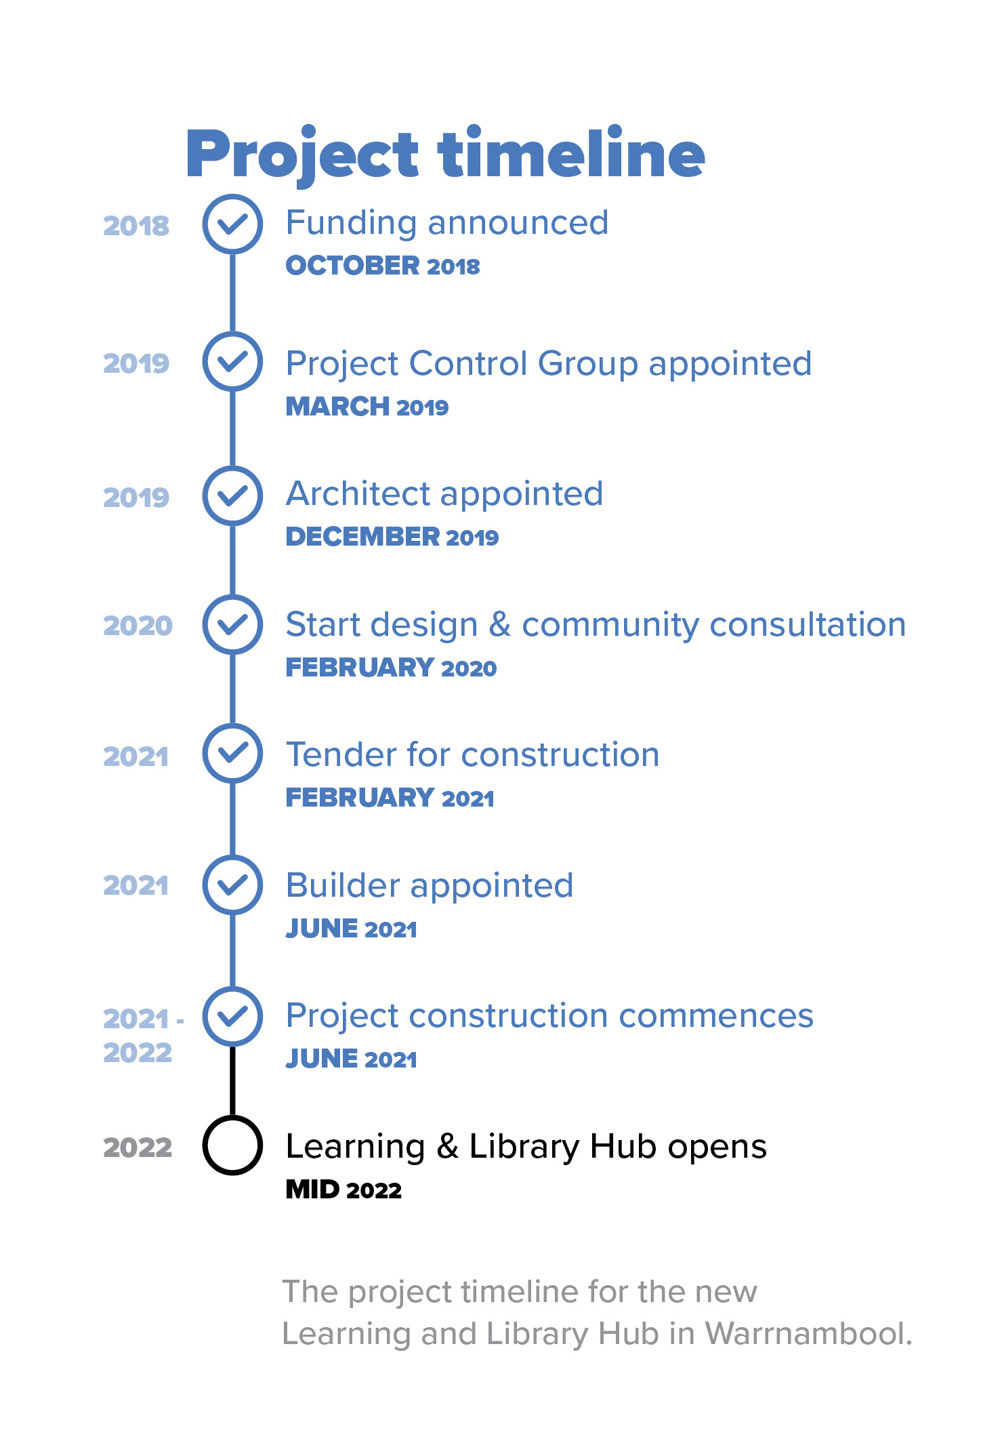 The project timeline for the new Learning and Library Hub in Warrnambool